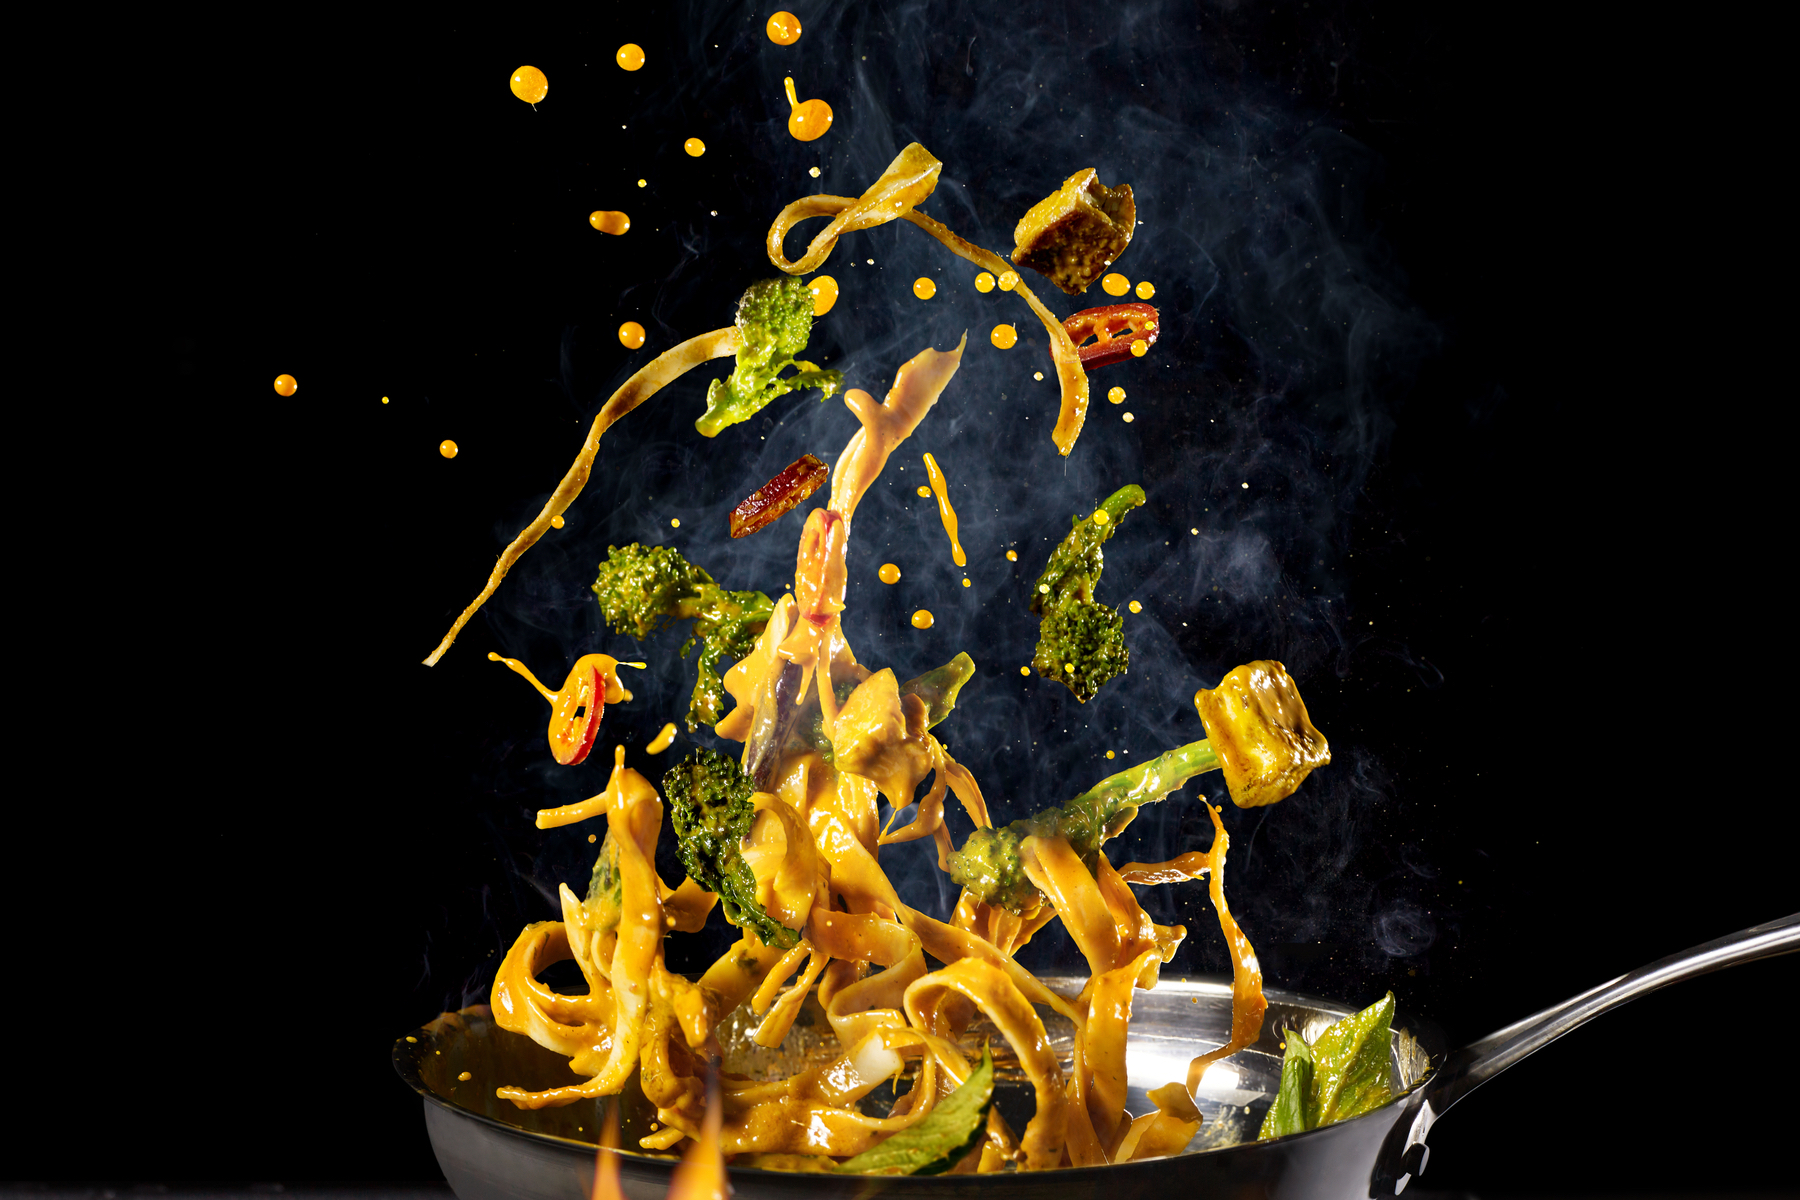 Fresh veggies, noodles, and sauce are tossed in the air by a black skillet